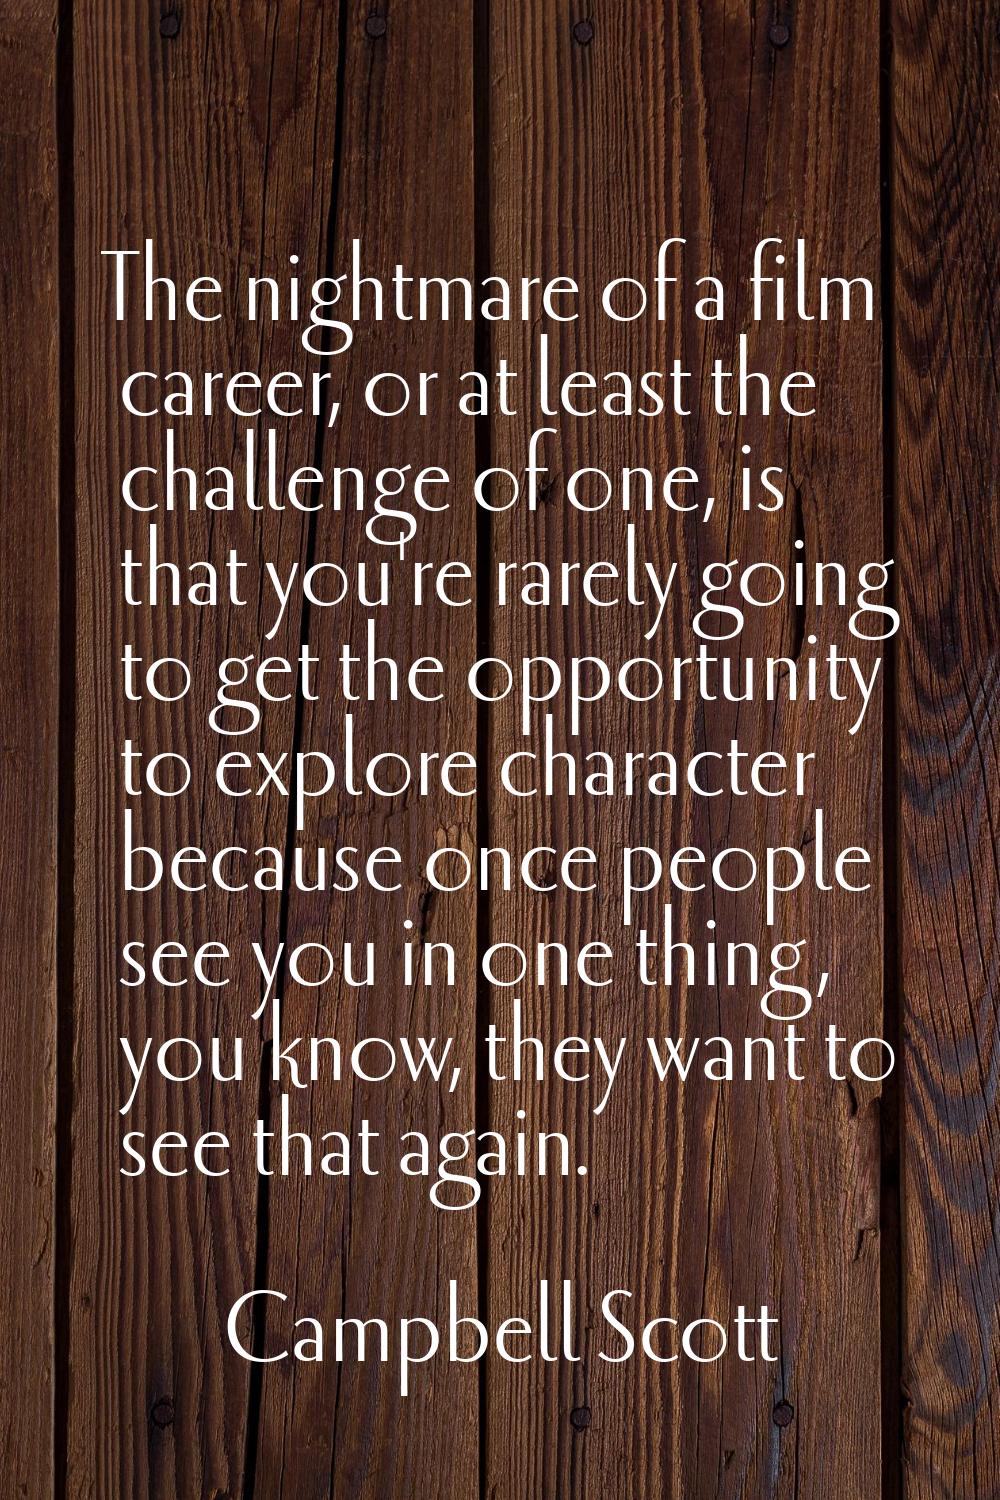 The nightmare of a film career, or at least the challenge of one, is that you're rarely going to ge